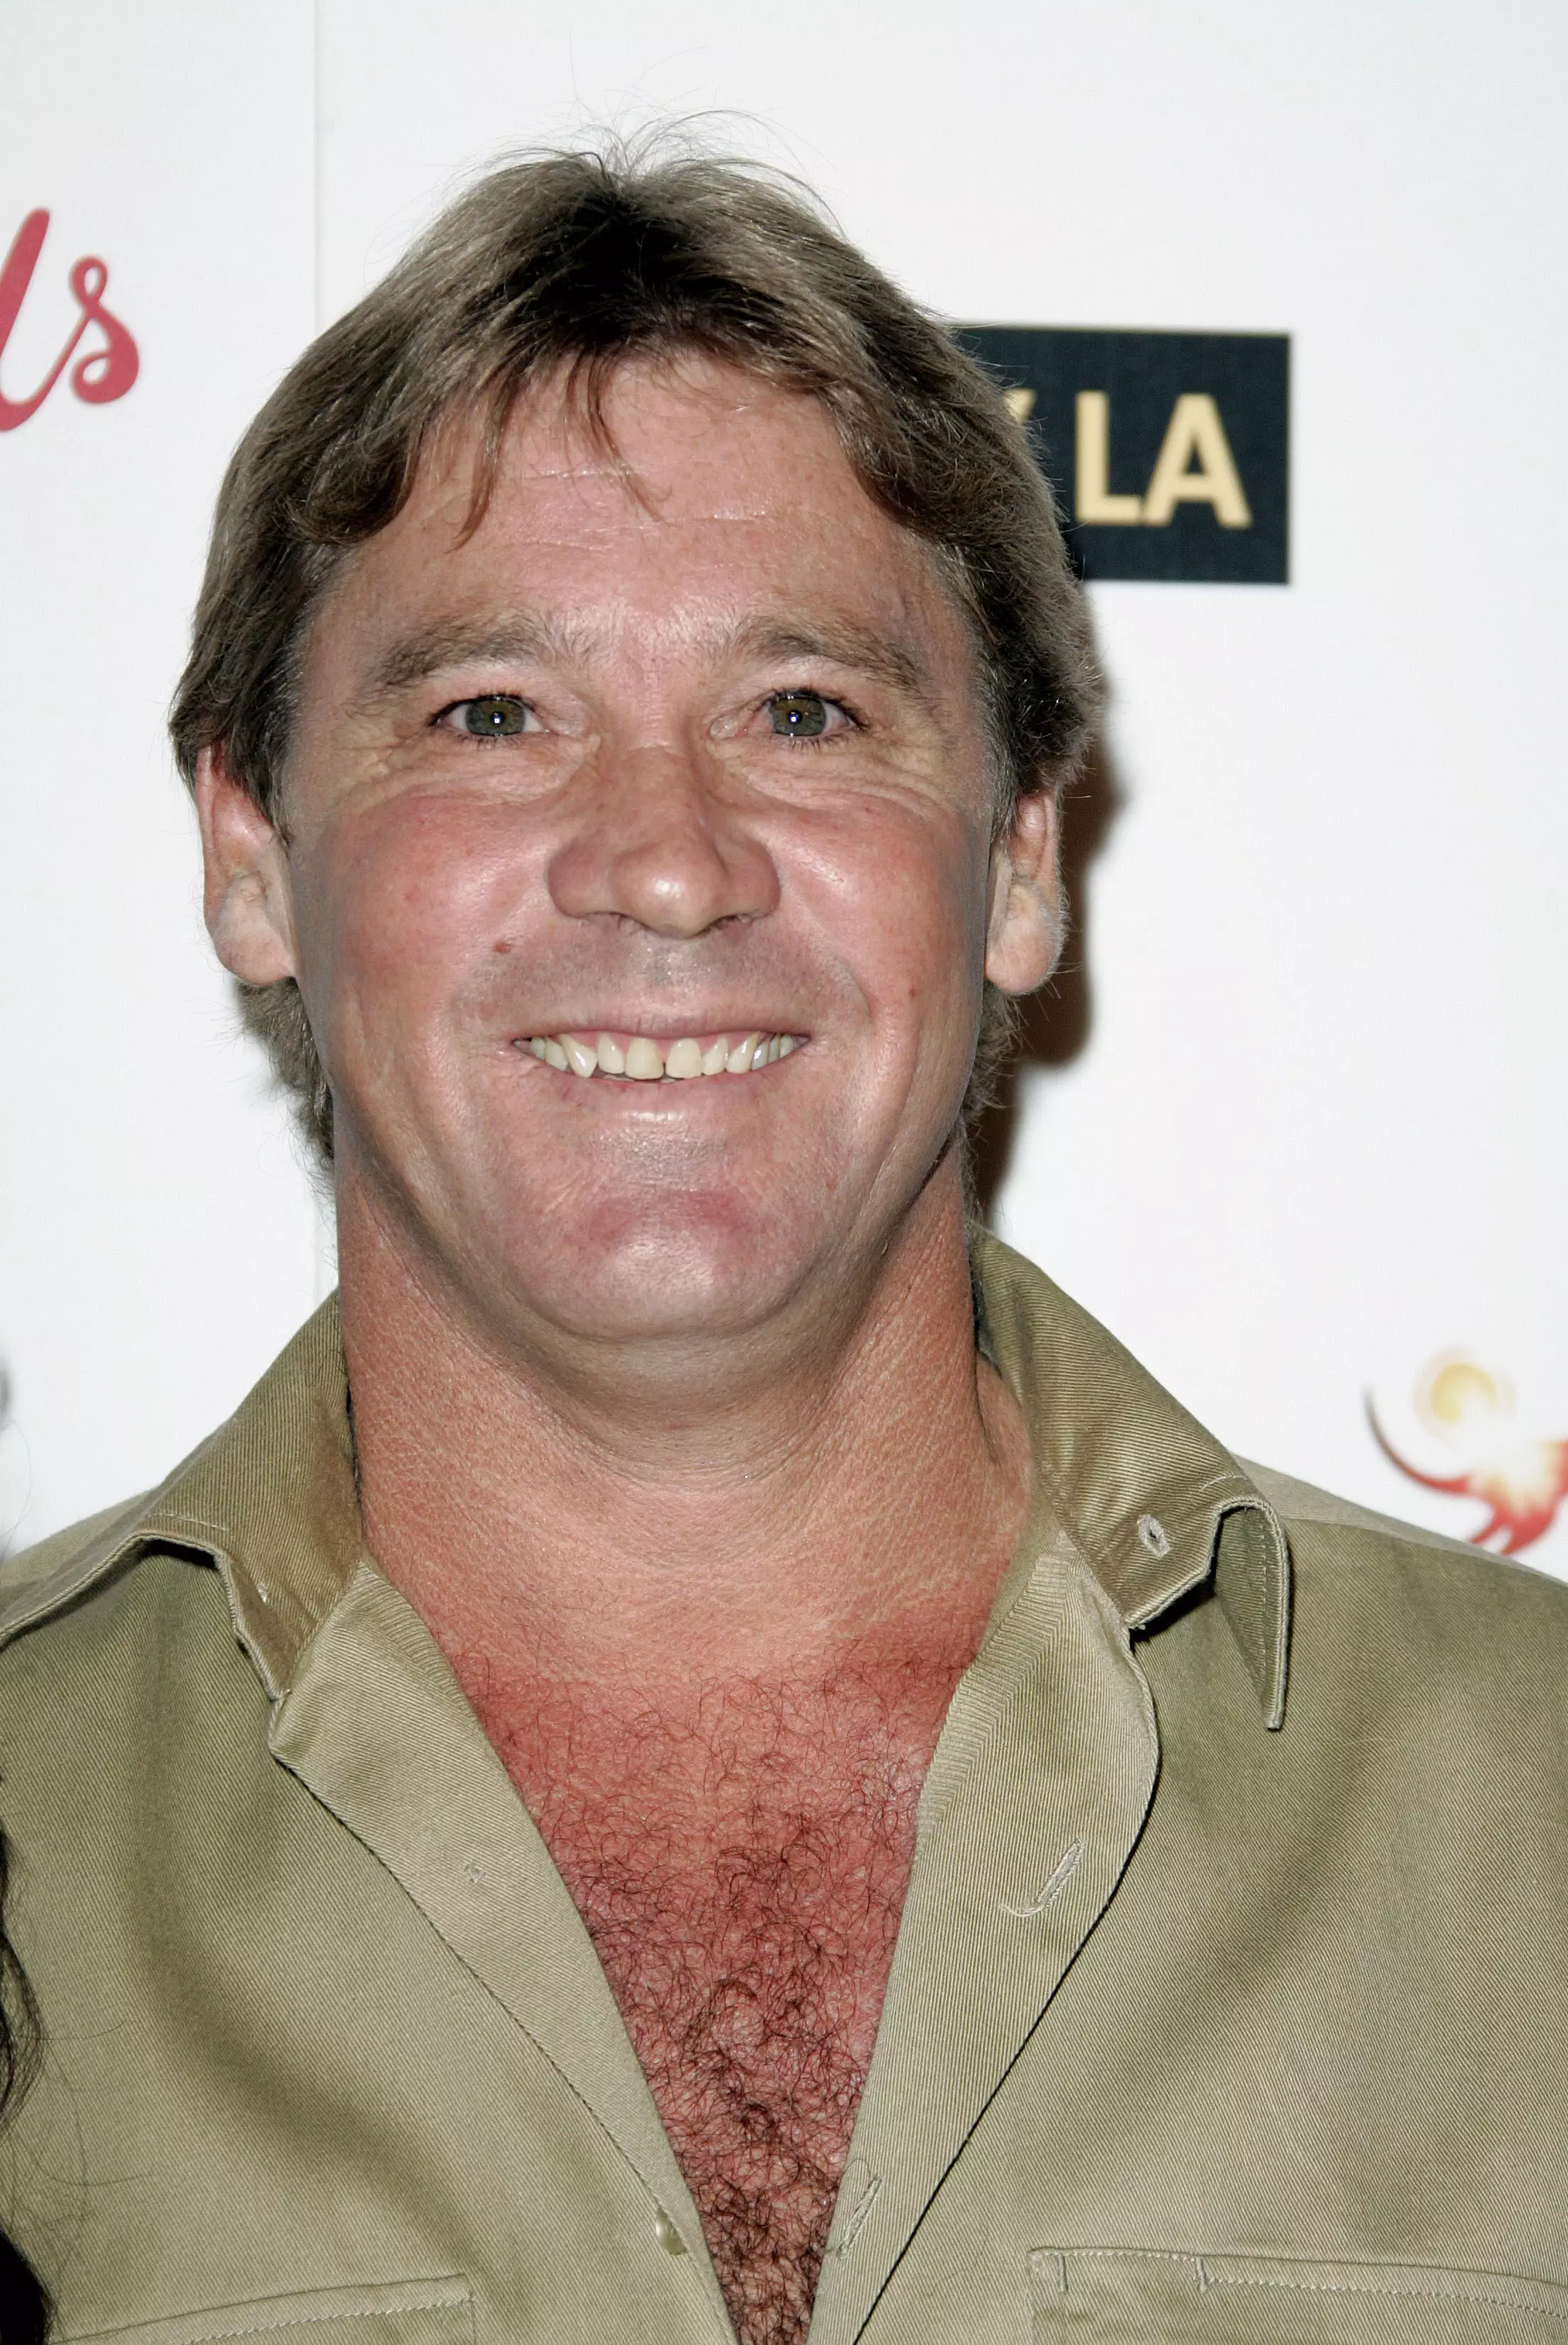 The late and great Steve Irwin.